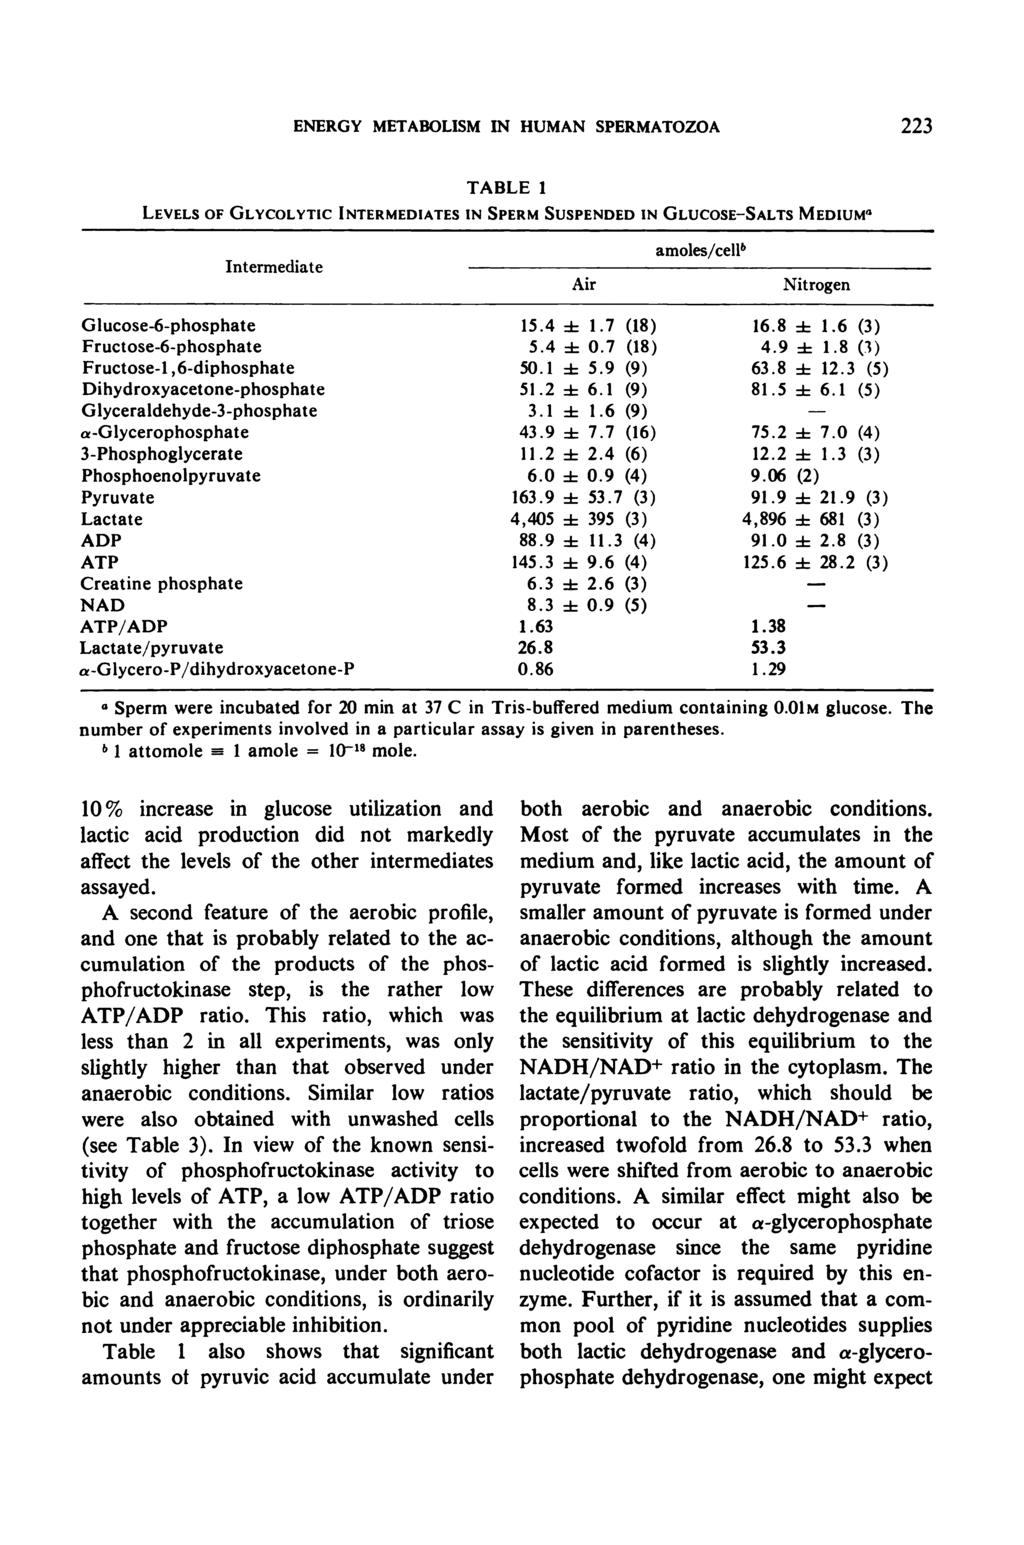 ENERGY METABOLISM IN HUMAN SPERMATOZOA 223 TABLE 1 LEVELS OF GLYCOLYTIC INTERMEDIATES IN SPERM SUSPENDED IN GLUCOSE-SALTS MEDIUM Intermediate Air amoles/cell Nitrogen Glucose-6-phosphate 15.4 ± 1.